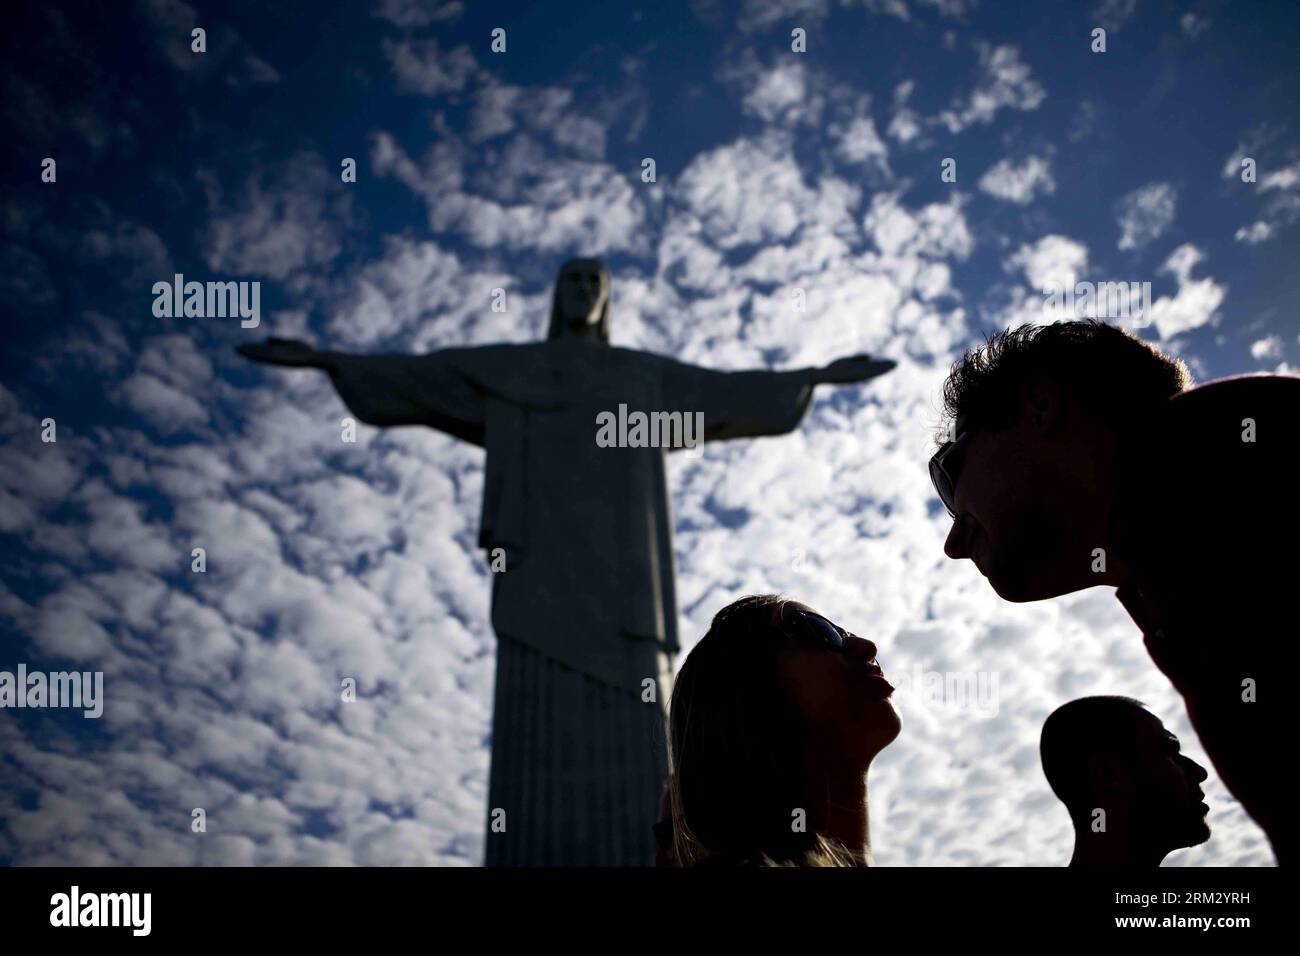 Bildnummer: 59919902  Datum: 29.06.2013  Copyright: imago/Xinhua (130630) -- RIO DE JANEIRO, June 29, 2013 (Xinhua) -- Tourists visit the statue of Christ the Redeemer on Corcovado Mountain, in Rio de Janeiro, Brazil, on June 29, 2013. Brazil will face Spain on Sunday during the final of the FIFA Confederation Cup Brazil 2013. (Xinhua/Guillermo Arias) (itm) (SP)BRAZIL-RIO DE JANEIRO-CONFEDERATIONS-CORCOVADO-SERIE PUBLICATIONxNOTxINxCHN Gesellschaft xas x0x 2013 quer premiumd     59919902 Date 29 06 2013 Copyright Imago XINHUA  Rio de Janeiro June 29 2013 XINHUA tourists Visit The Statue of Chr Stock Photo